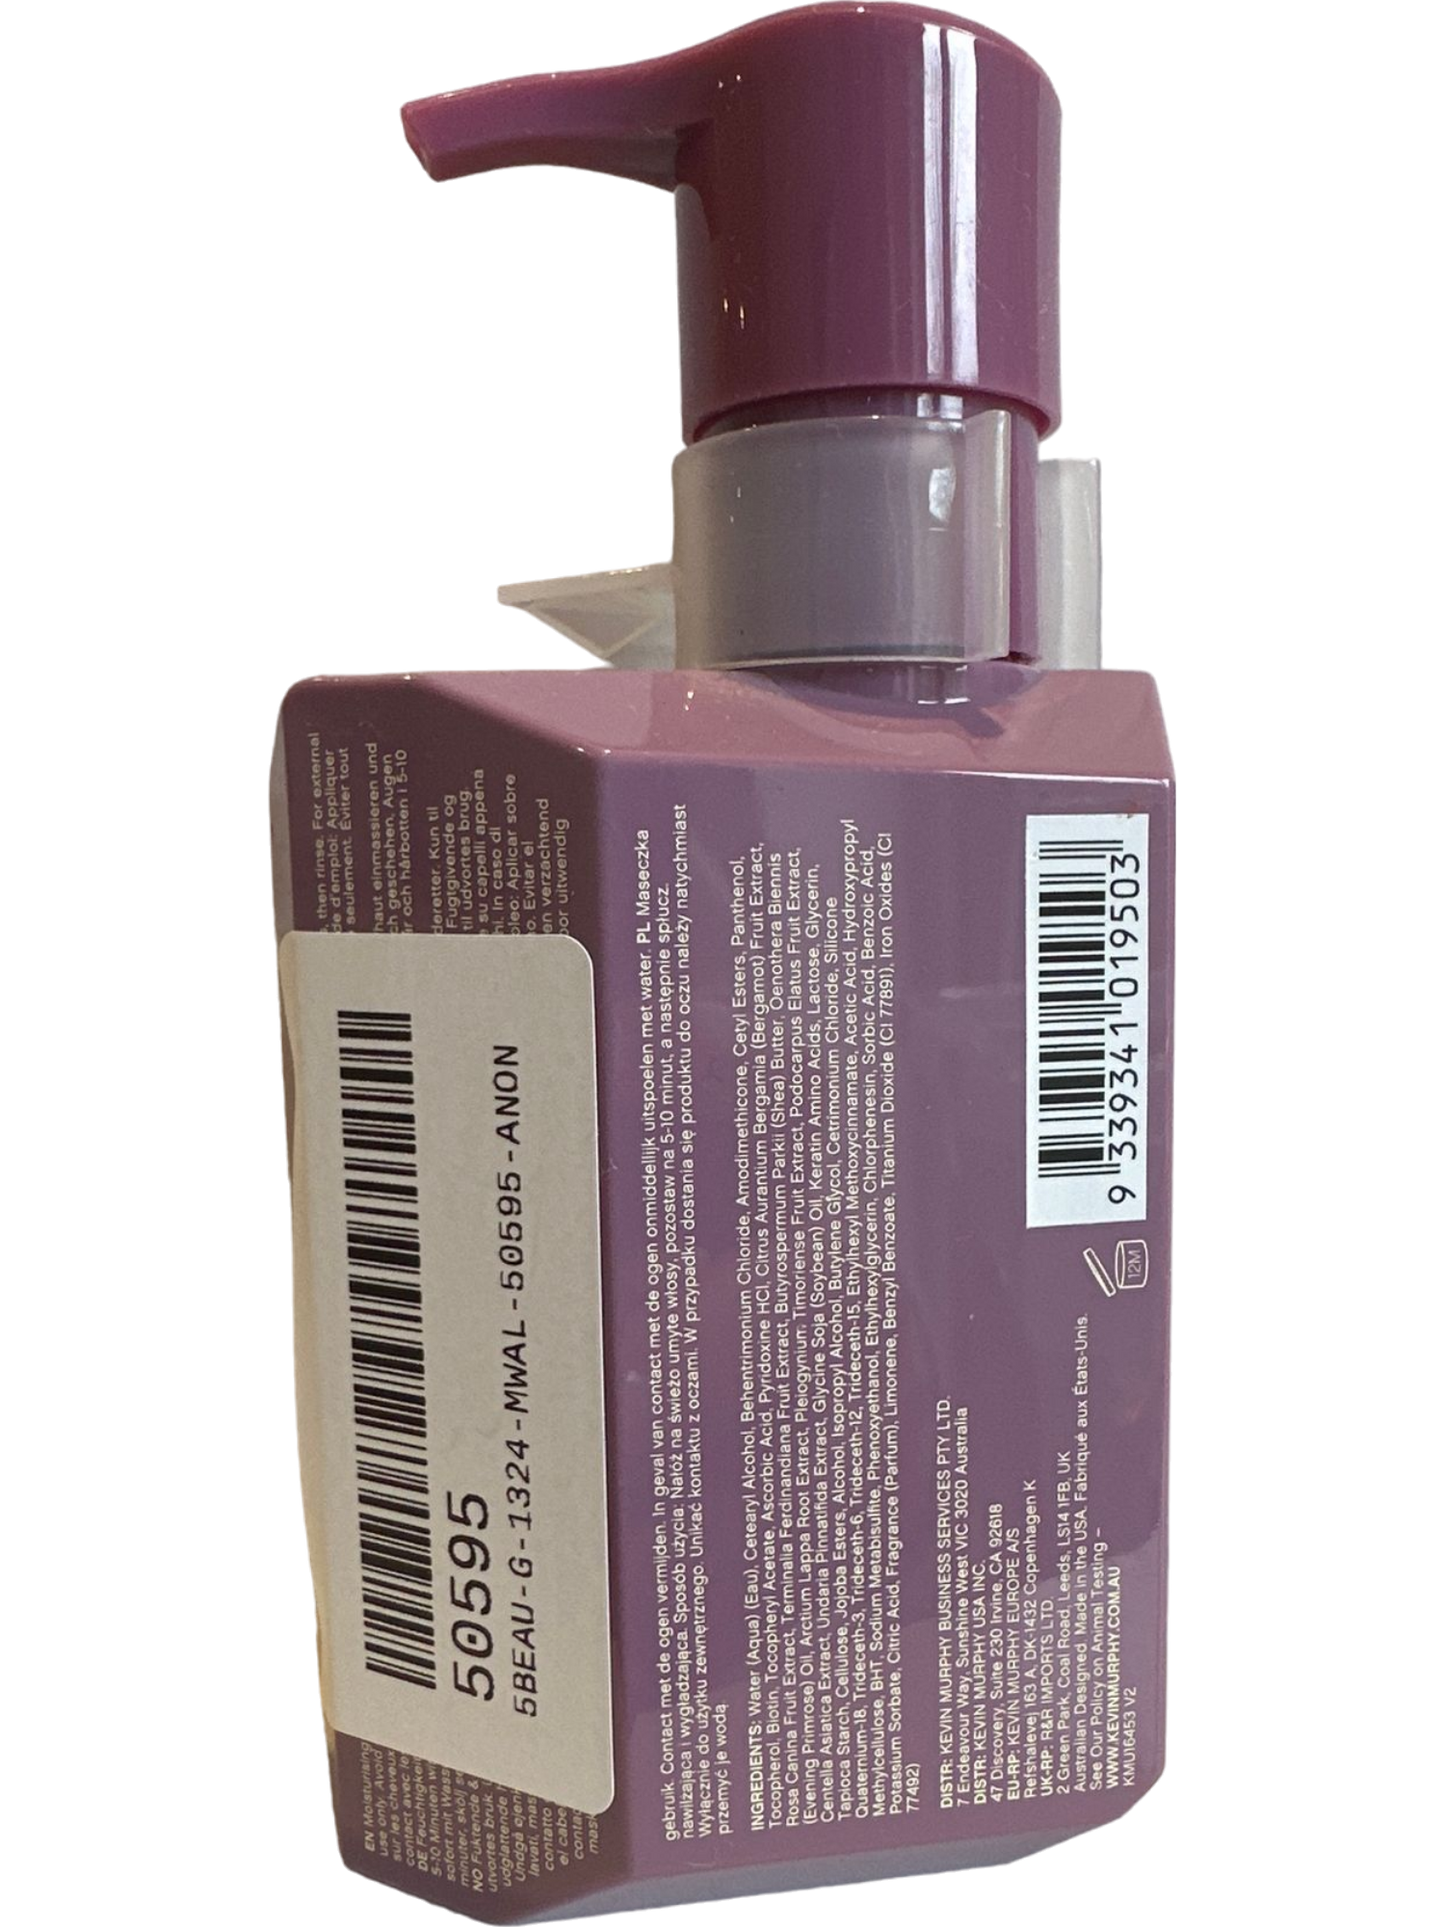 Kevin Murphy Hydrate-Me.Masque Hair Treatment 6.7 Oz